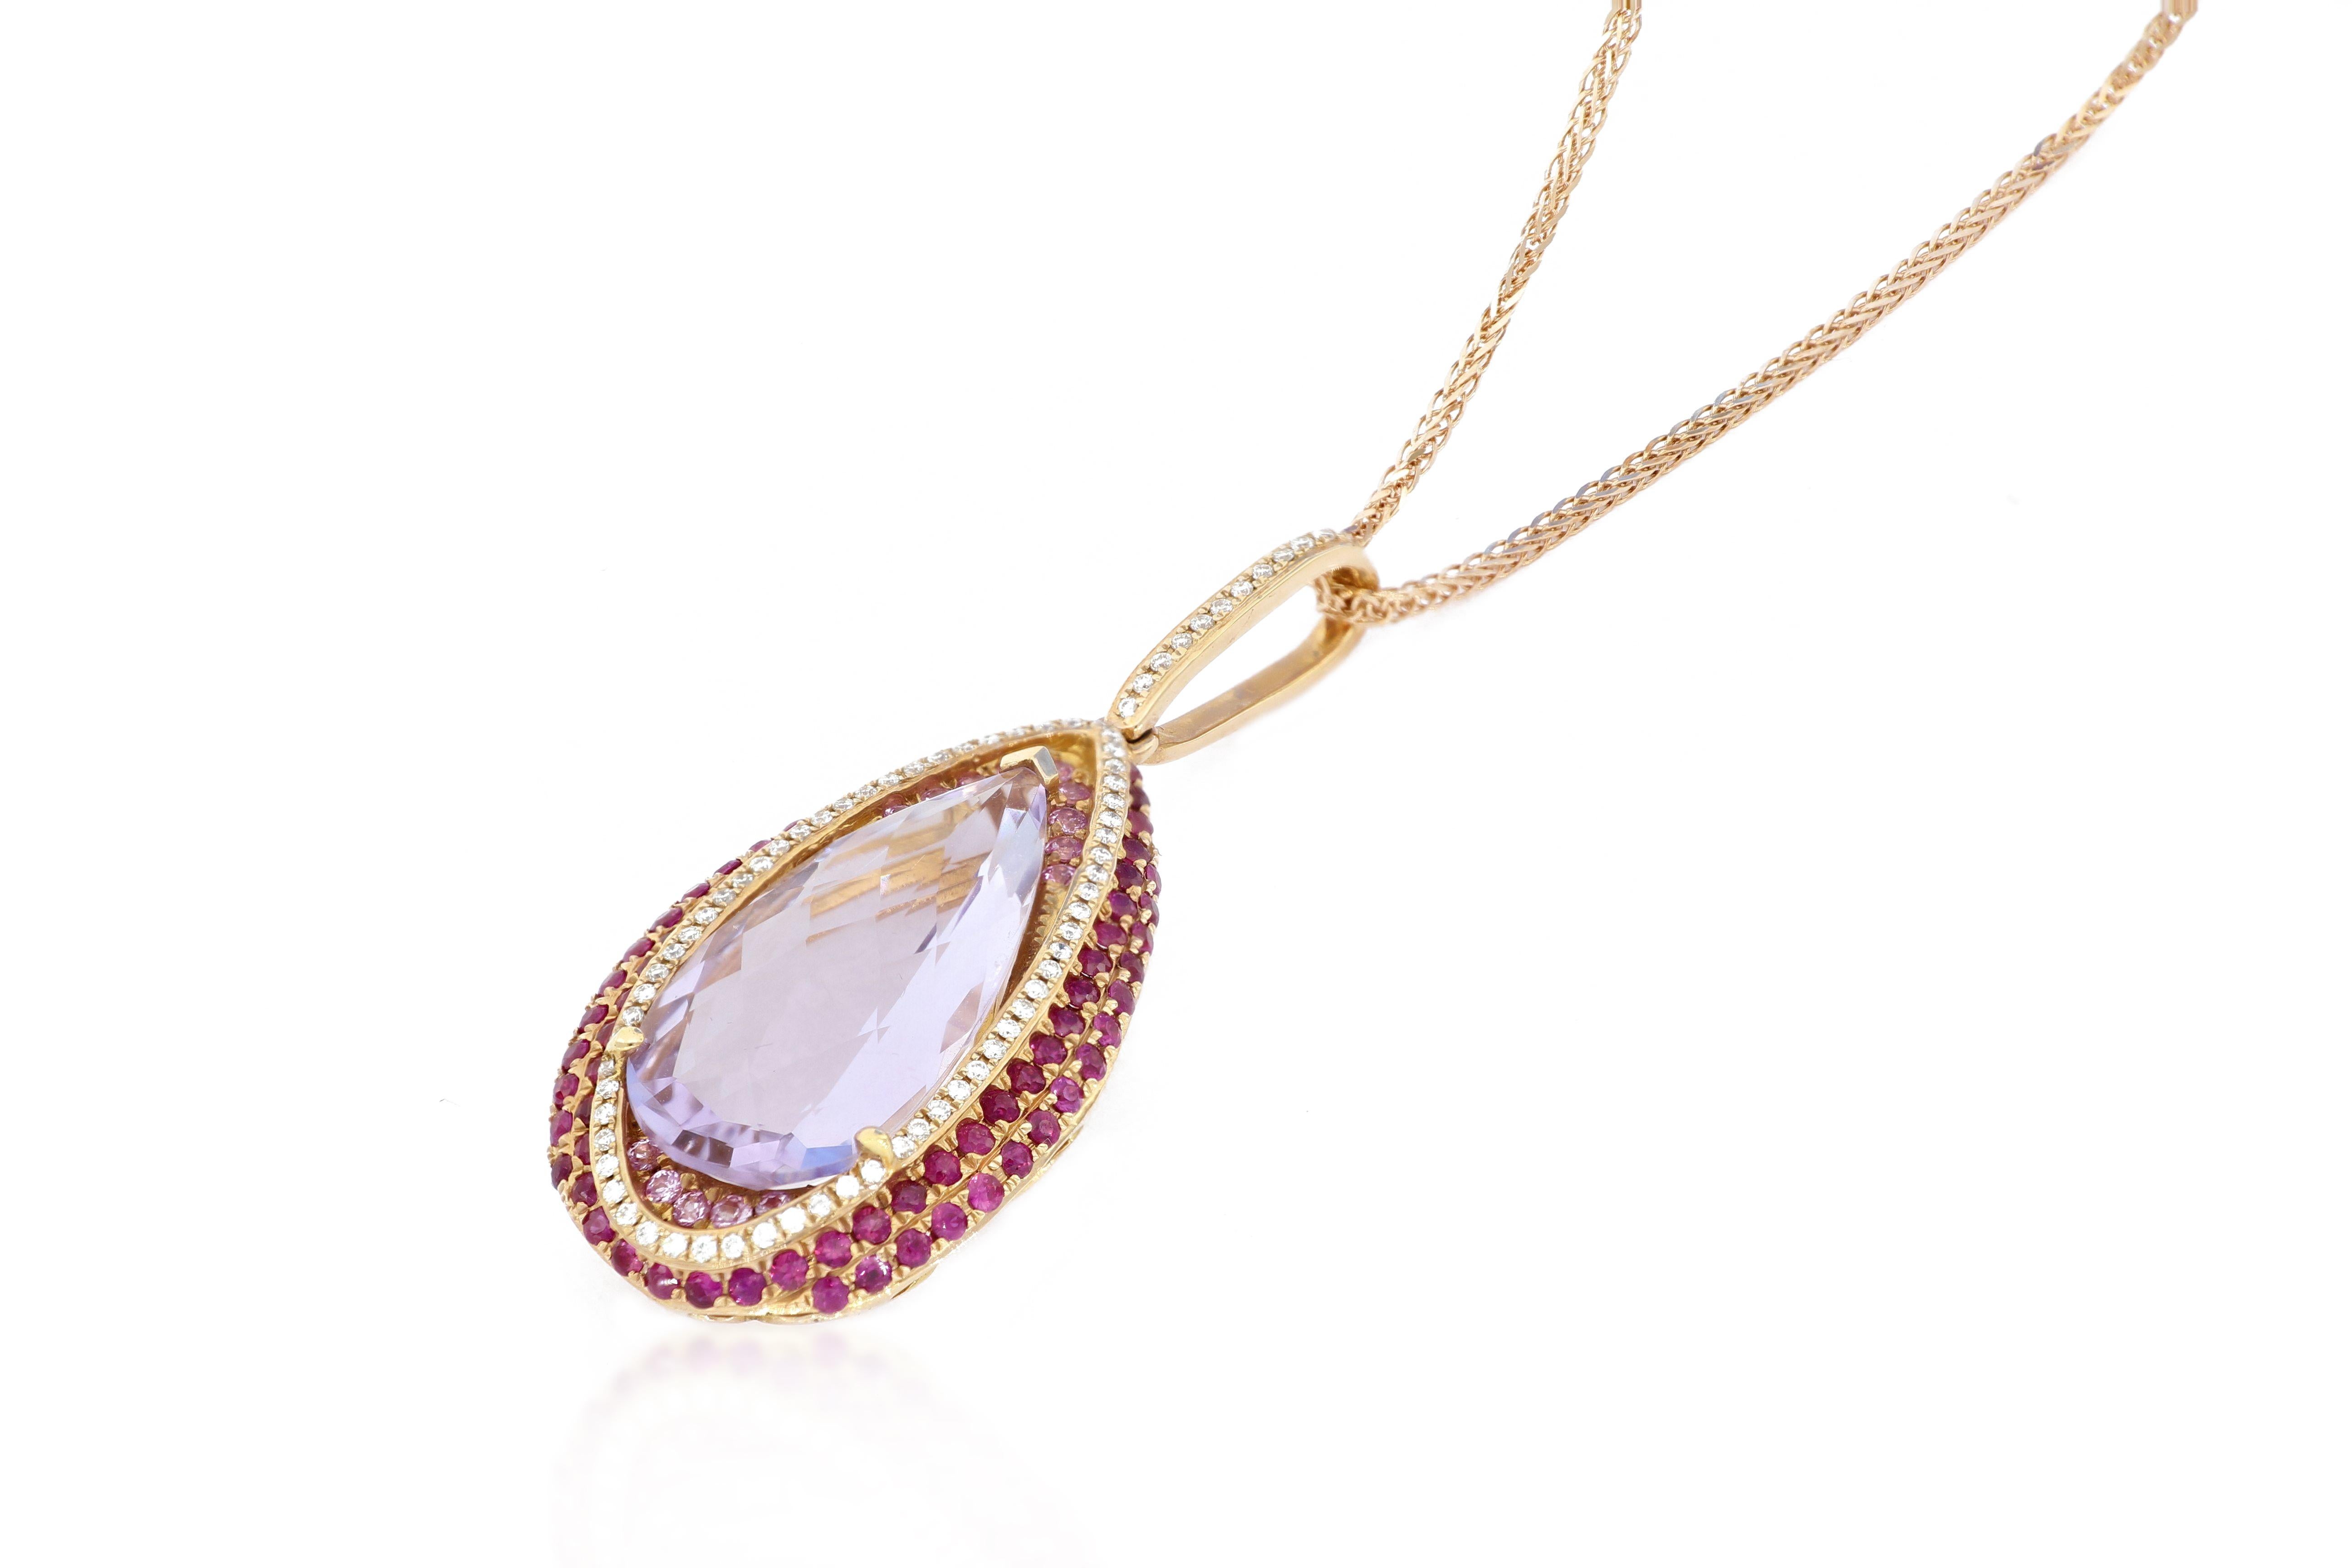 Contemporary 18 Karat Gold Amethyst Pendant with Necklace For Sale